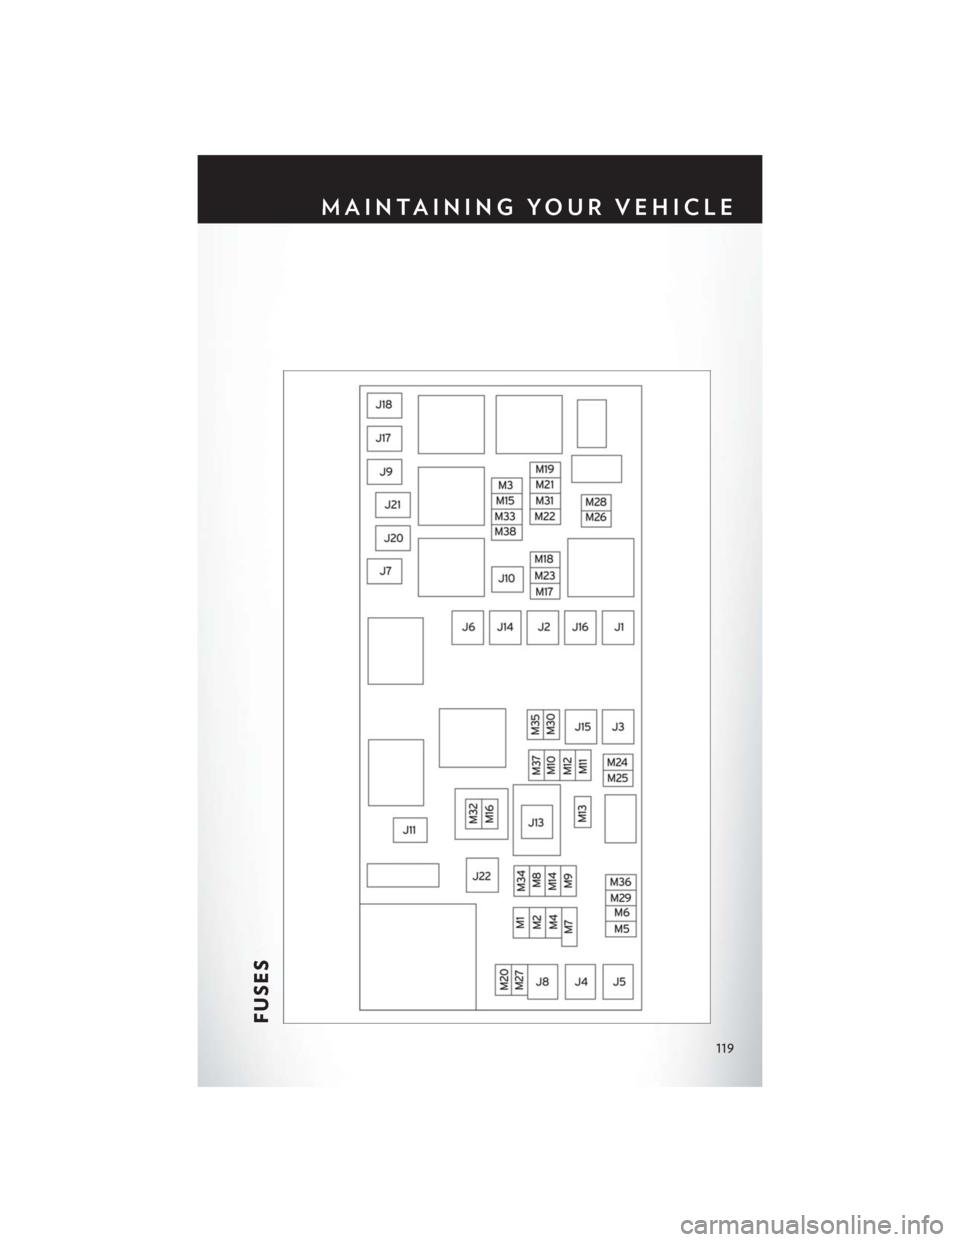 CHRYSLER TOWN AND COUNTRY 2013 5.G User Guide FUSES
MAINTAINING YOUR VEHICLE
119 